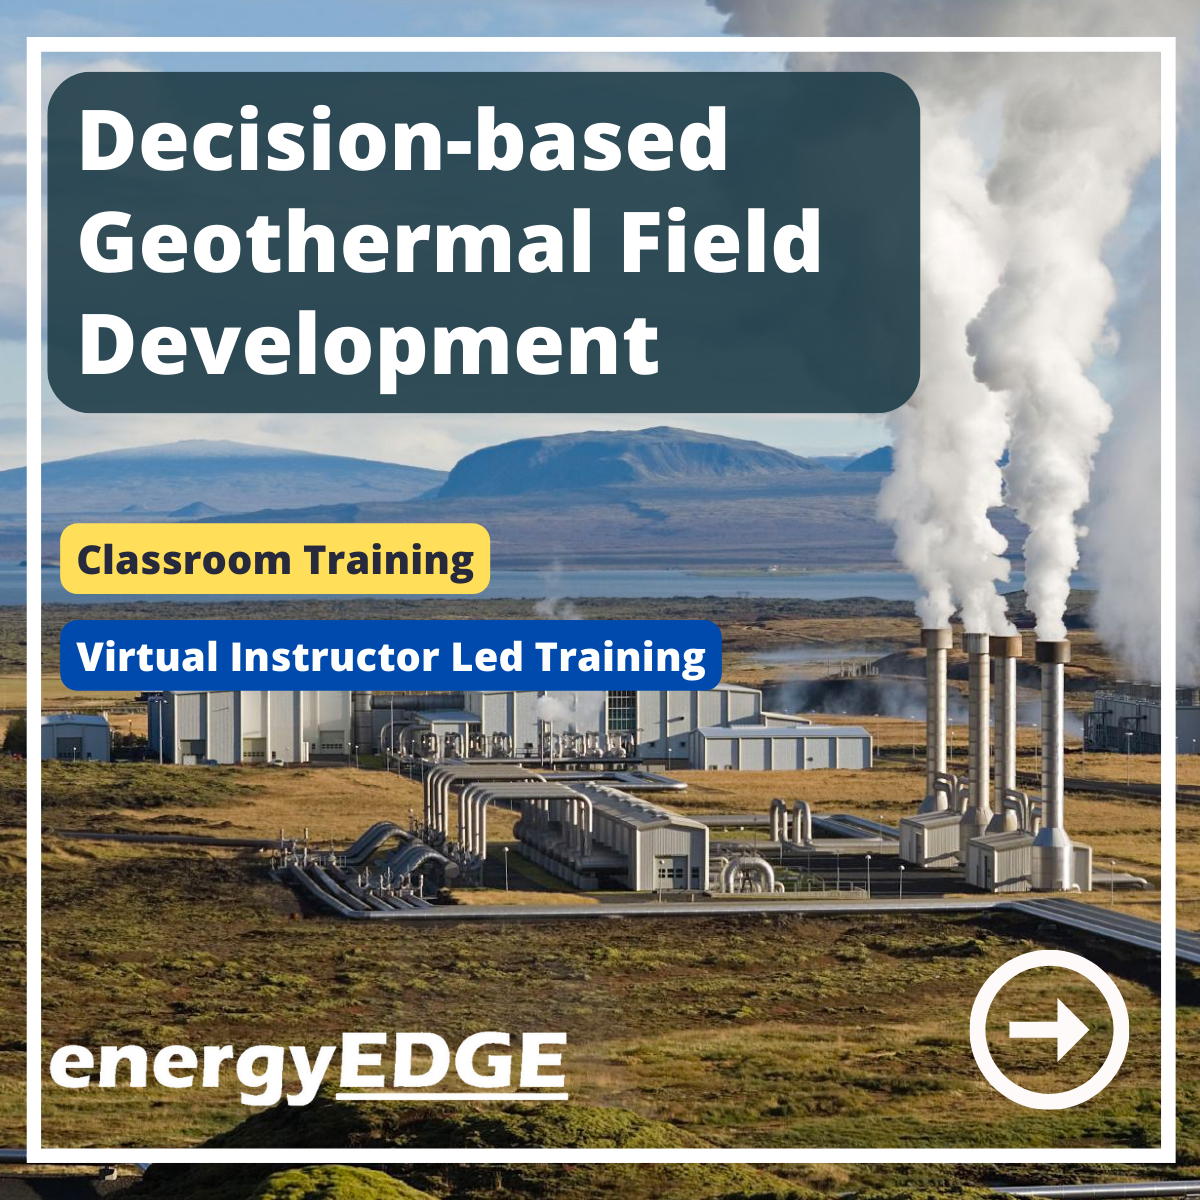 Decision-based Geothermal Field Development